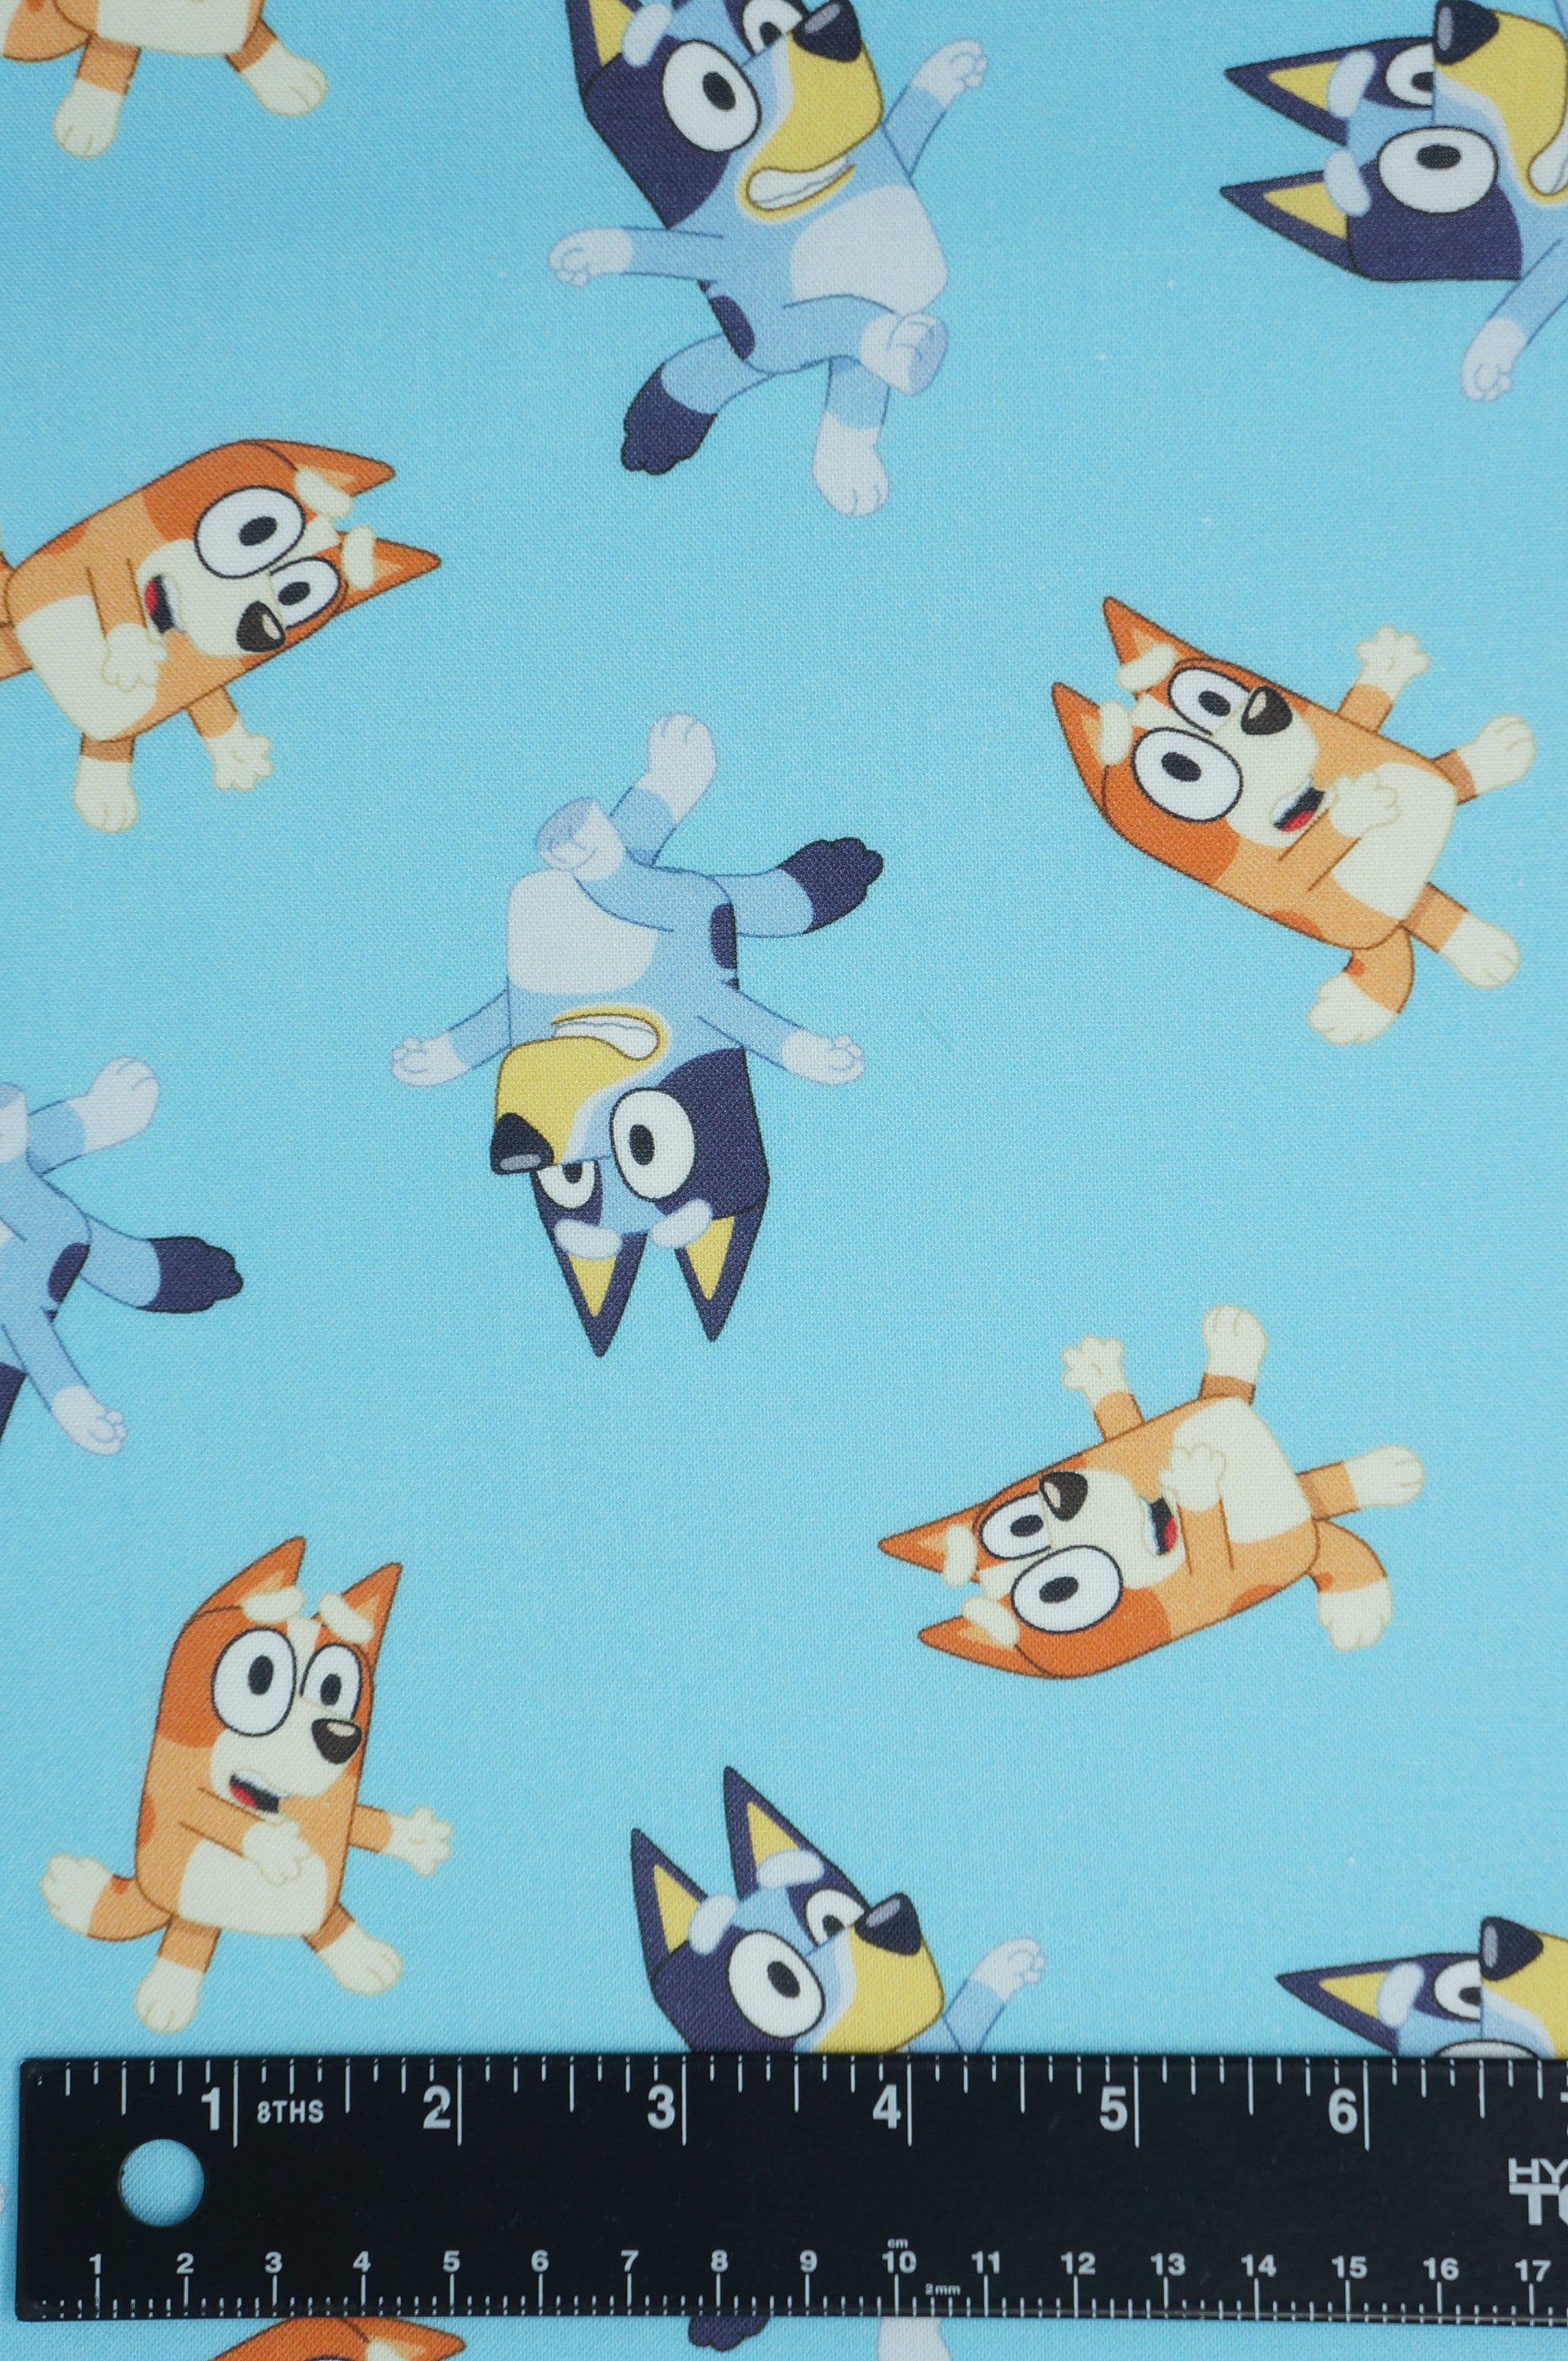 BLUEY & BINGO Fabric Springs Creative Licensed Character by the